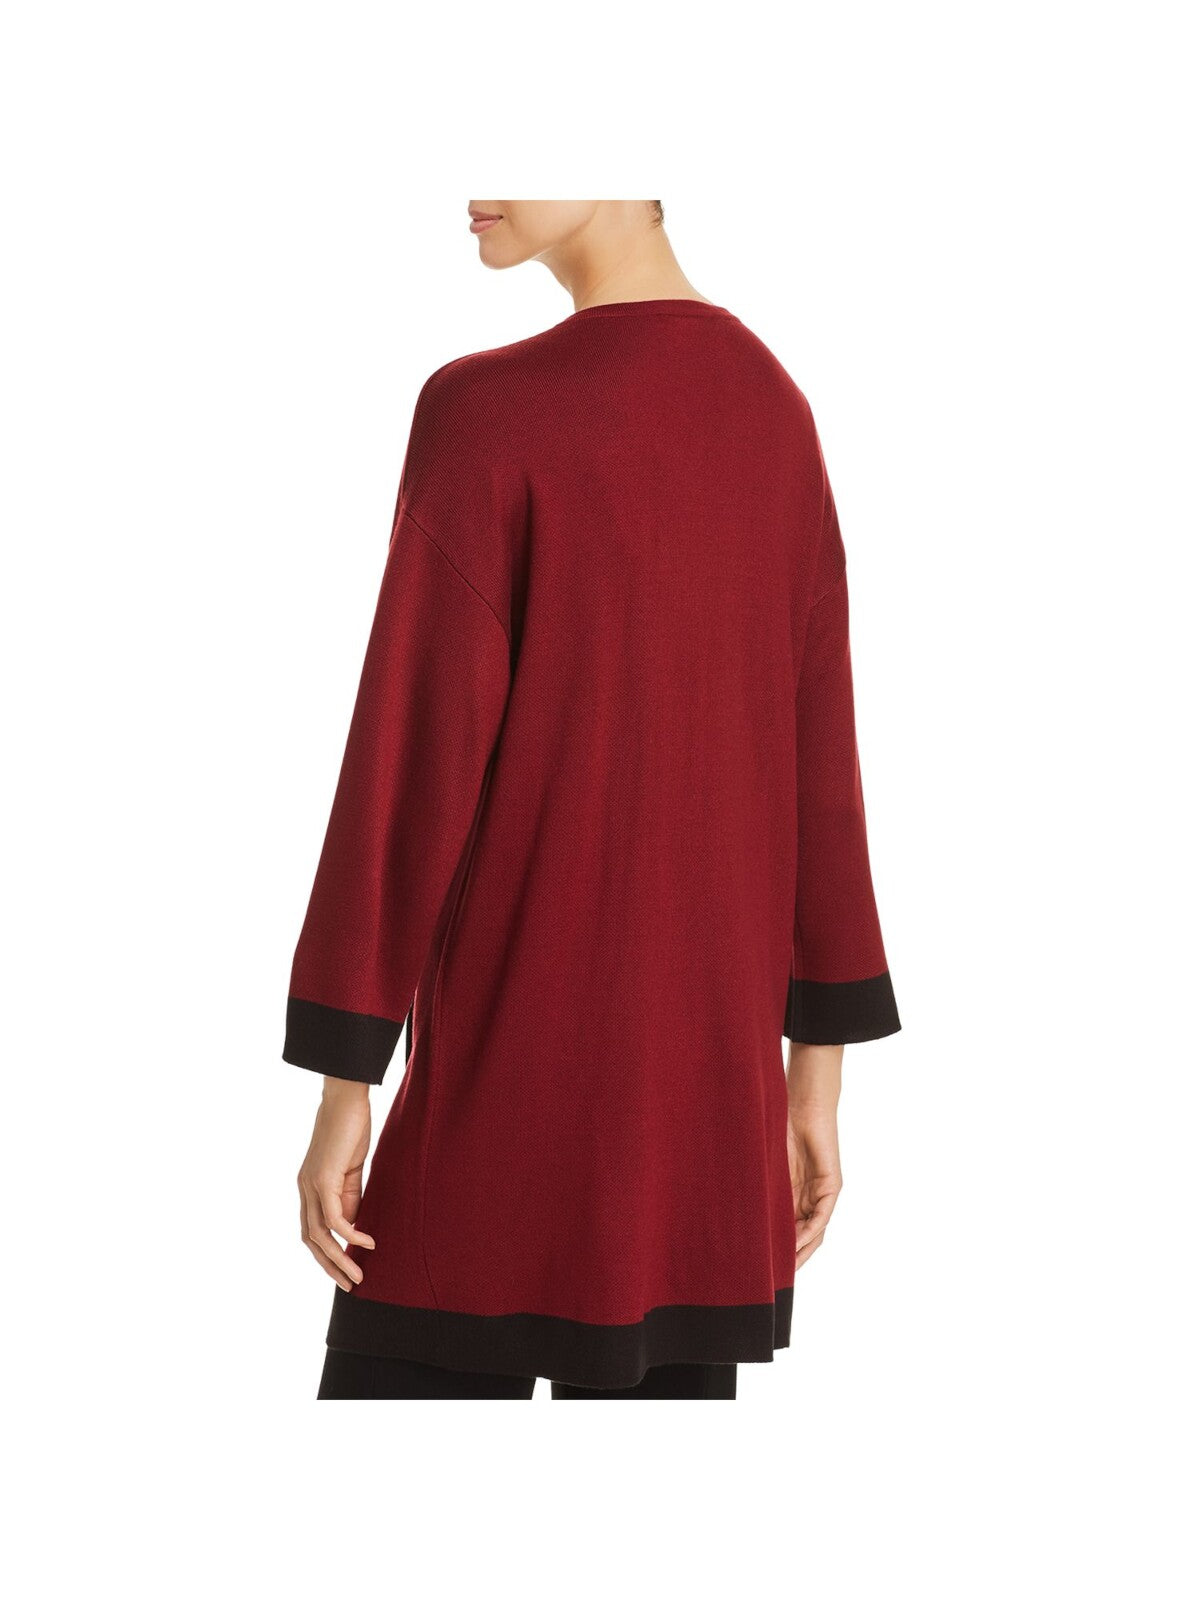 AVEC Womens Red Color Block 3/4 Sleeve Open Front Wear To Work Duster Sweater L